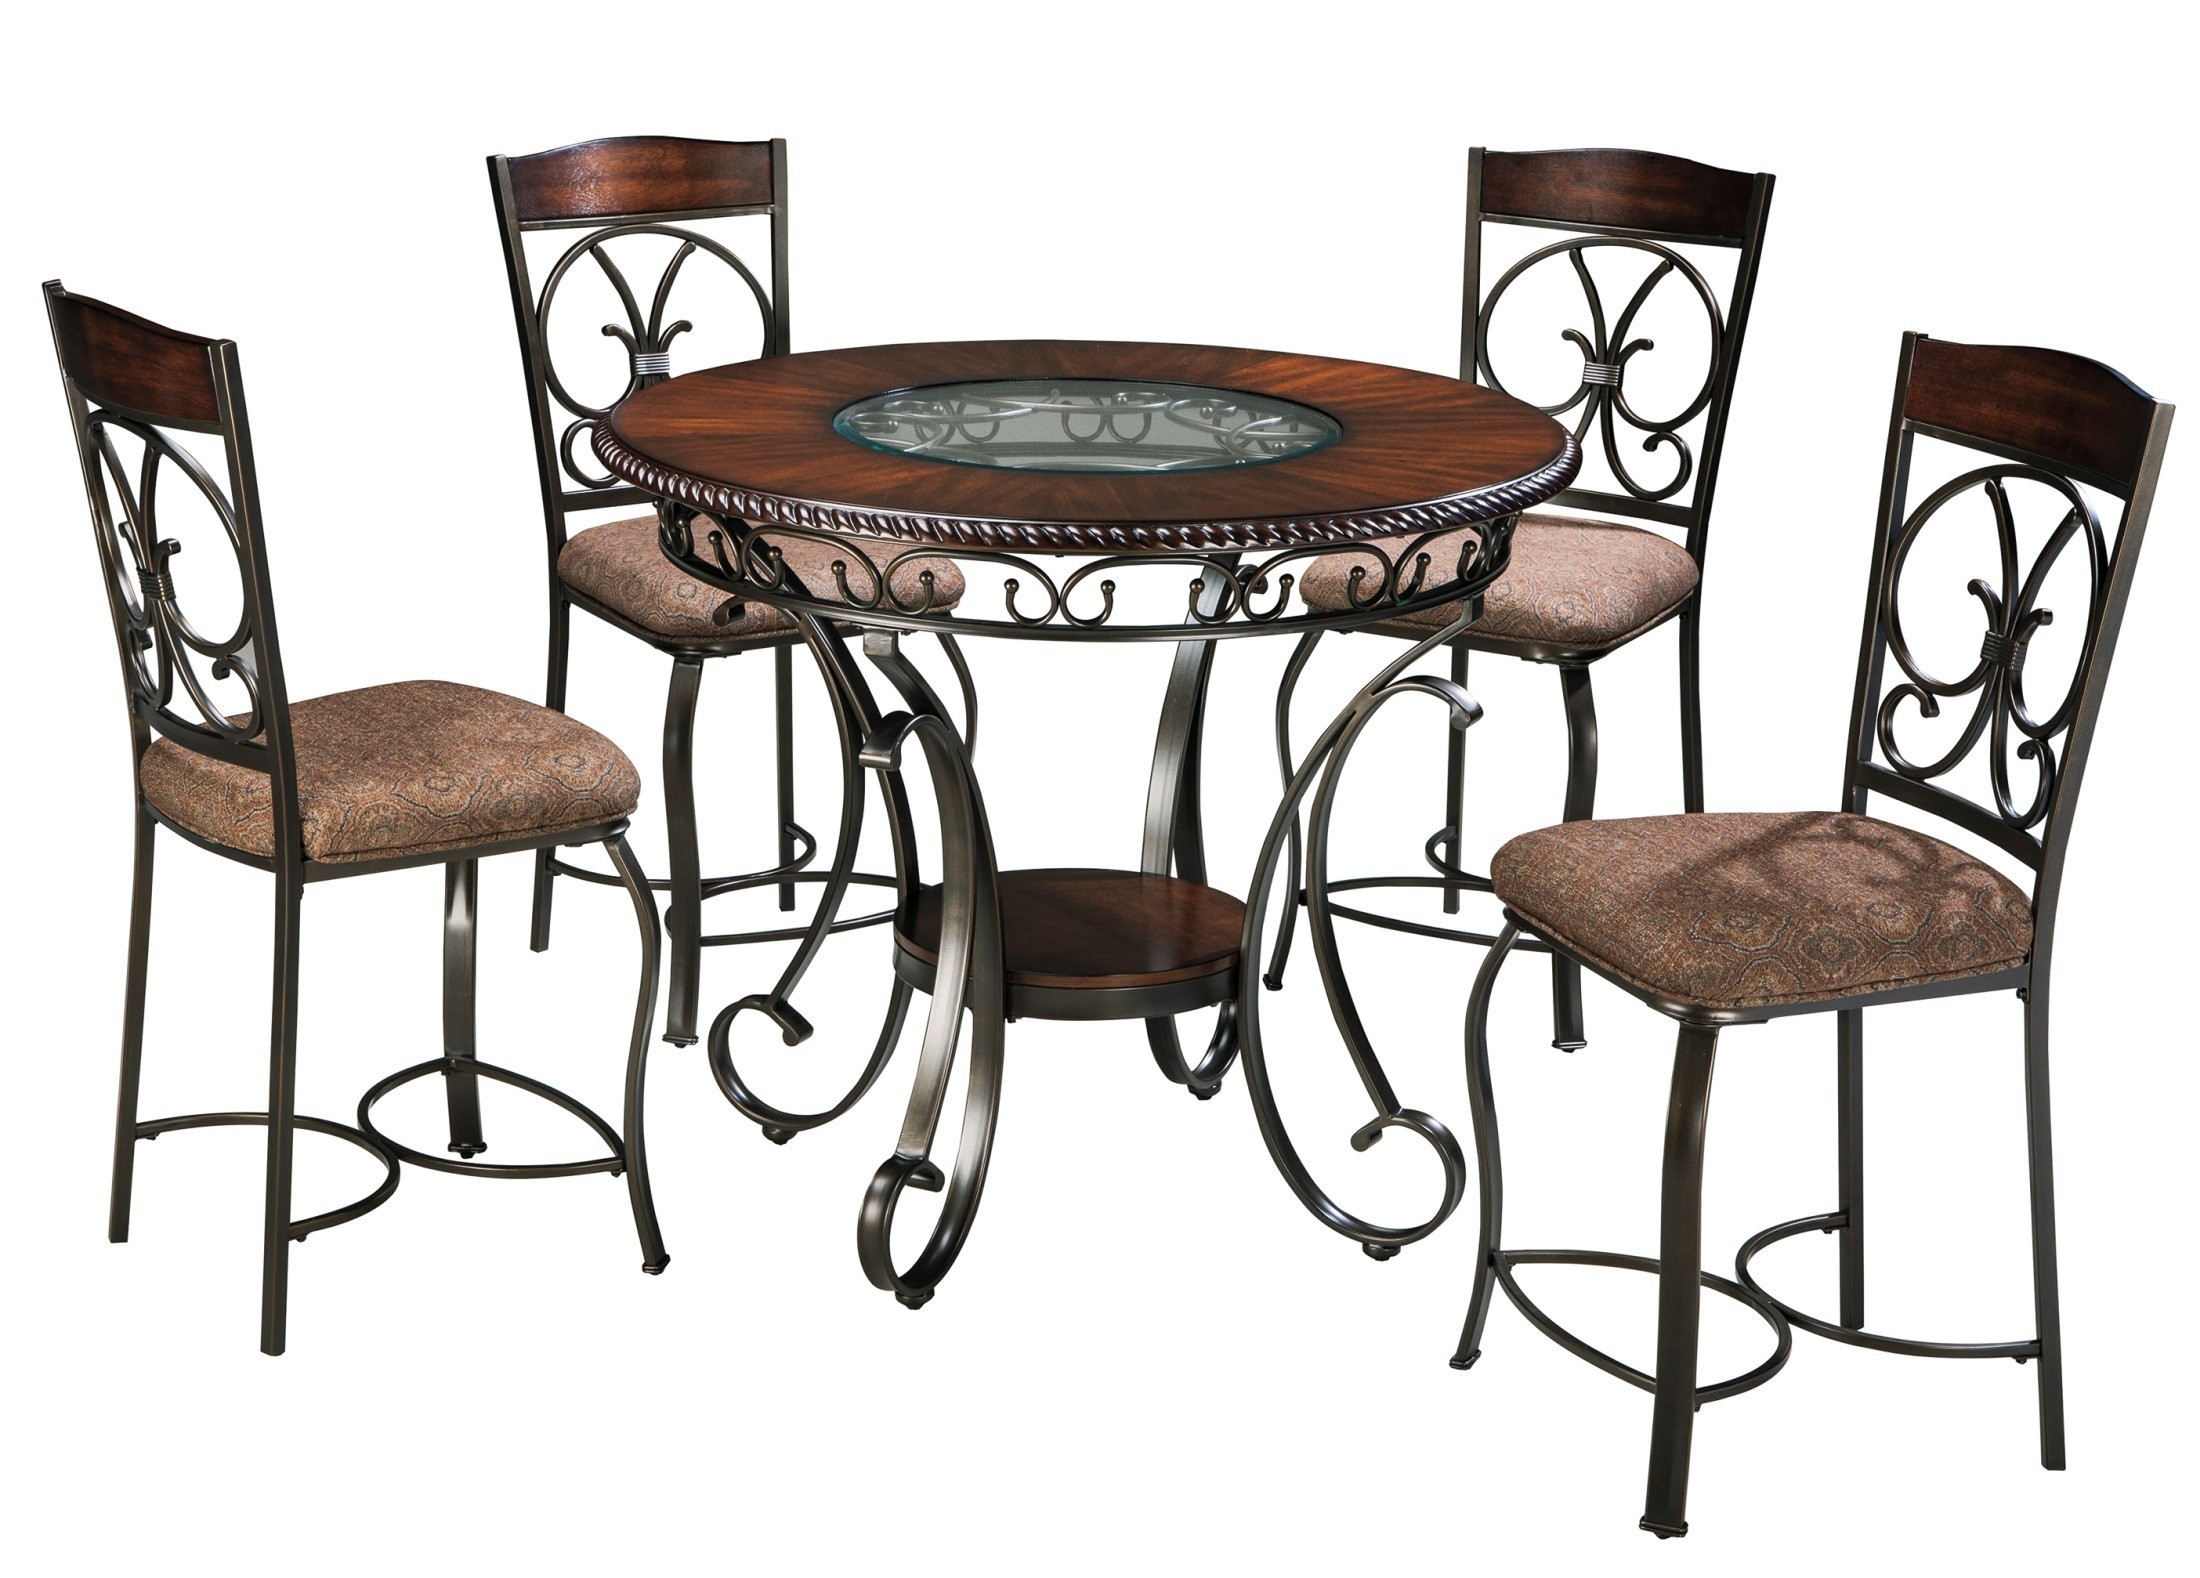 Glambrey round dining room counter height table set from 1